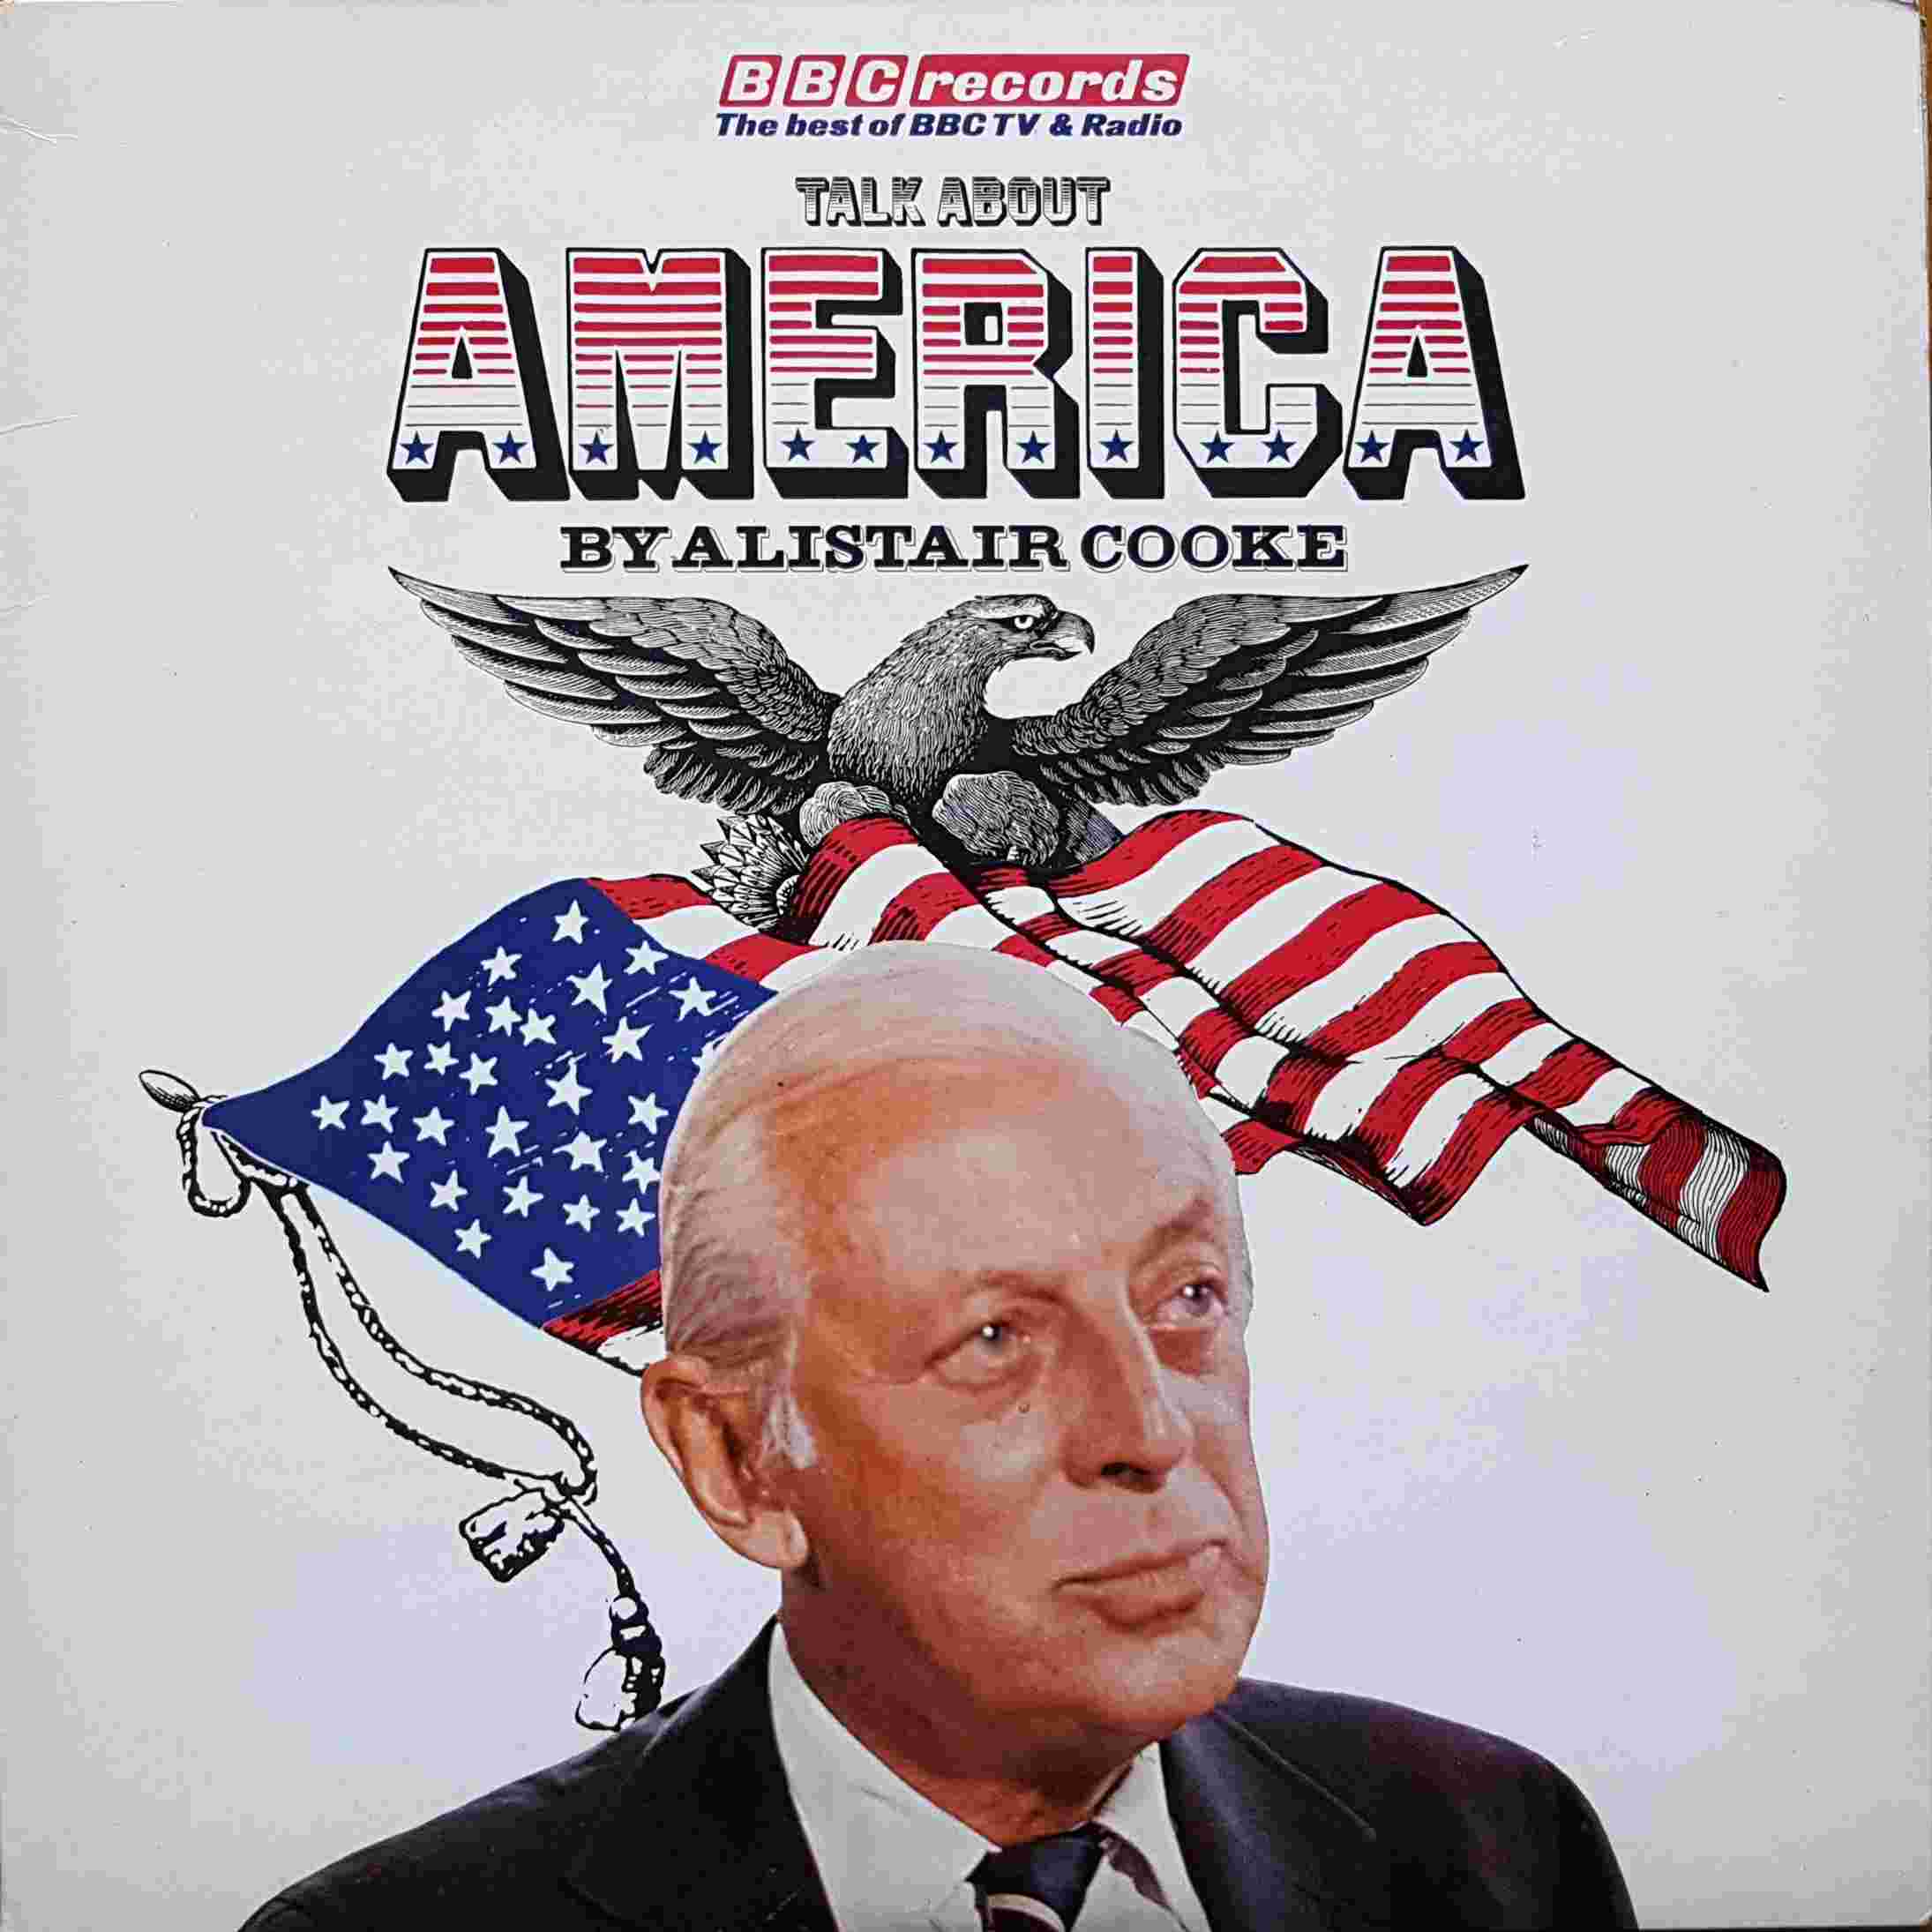 Picture of BBC 51 Talk about America by artist Alistair Cooke from the BBC albums - Records and Tapes library